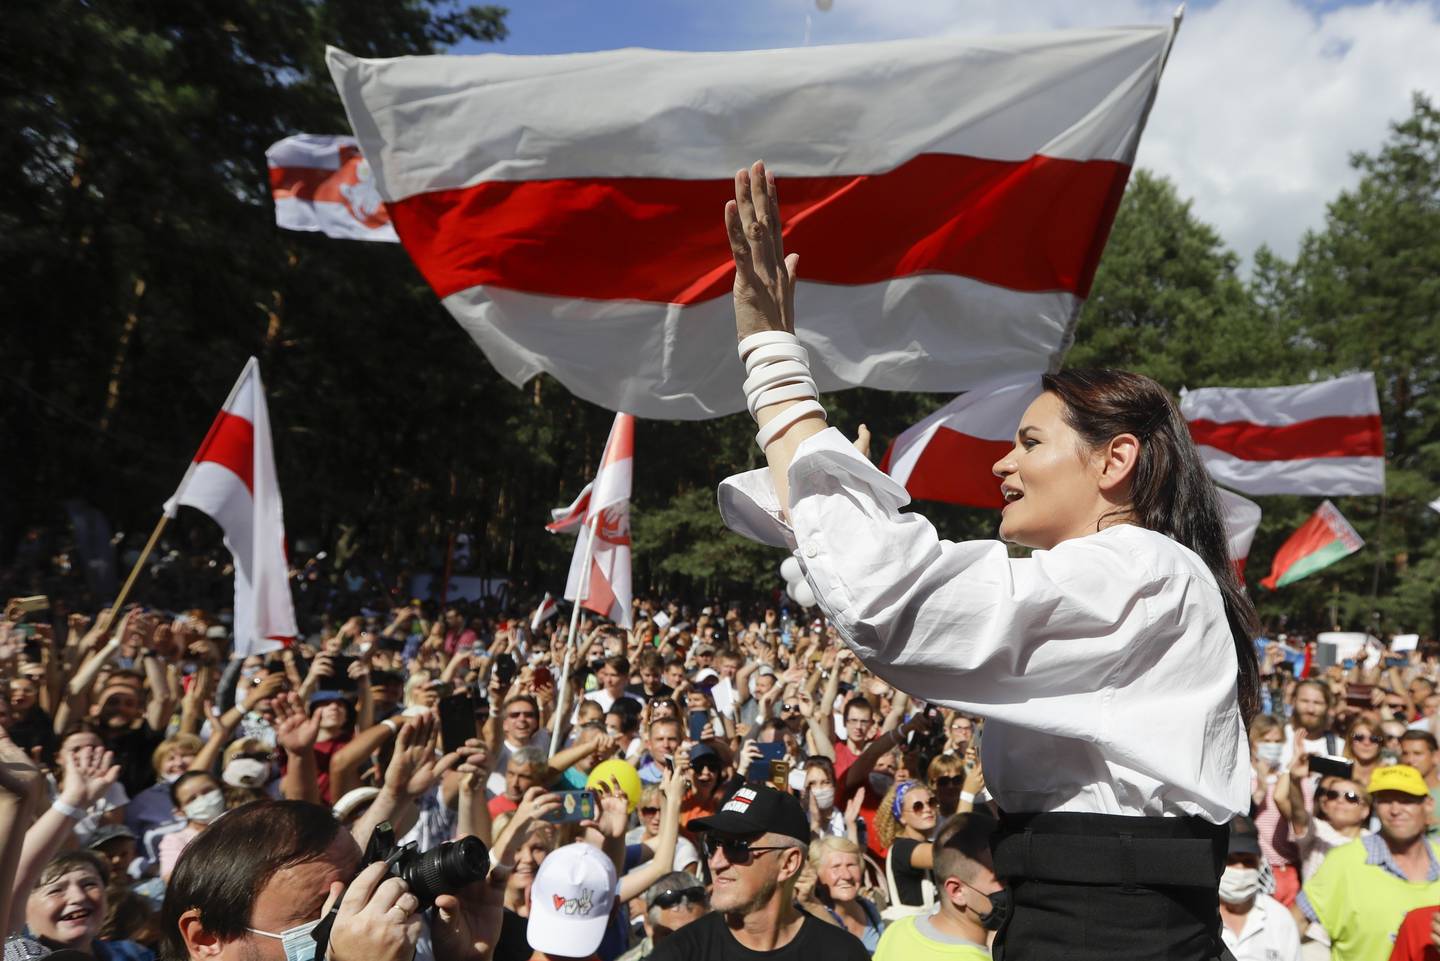 FILE - Sviatlana Tsikhanouskaya, candidate for the presidential elections greets people waving old Belarus flags during a meeting to show her support in Brest, 326 km (203,7 miles) southwest of Minsk, Belarus on Sunday, Aug. 2, 2020. Belarusian opposition leader Sviatlana Tsikhanouskaya says she received an anonymous note alleging that her imprisoned husband, also an opposition figure, died behind bars. Siarhei Tsikhanouski was arrested in 2020 after announcing plans to run against Belarus' authoritarian leader, Alexander Lukashenko, in presidential elections that year. Tsikhanouskaya ran in his stead after the arrest. (AP Photo, File)